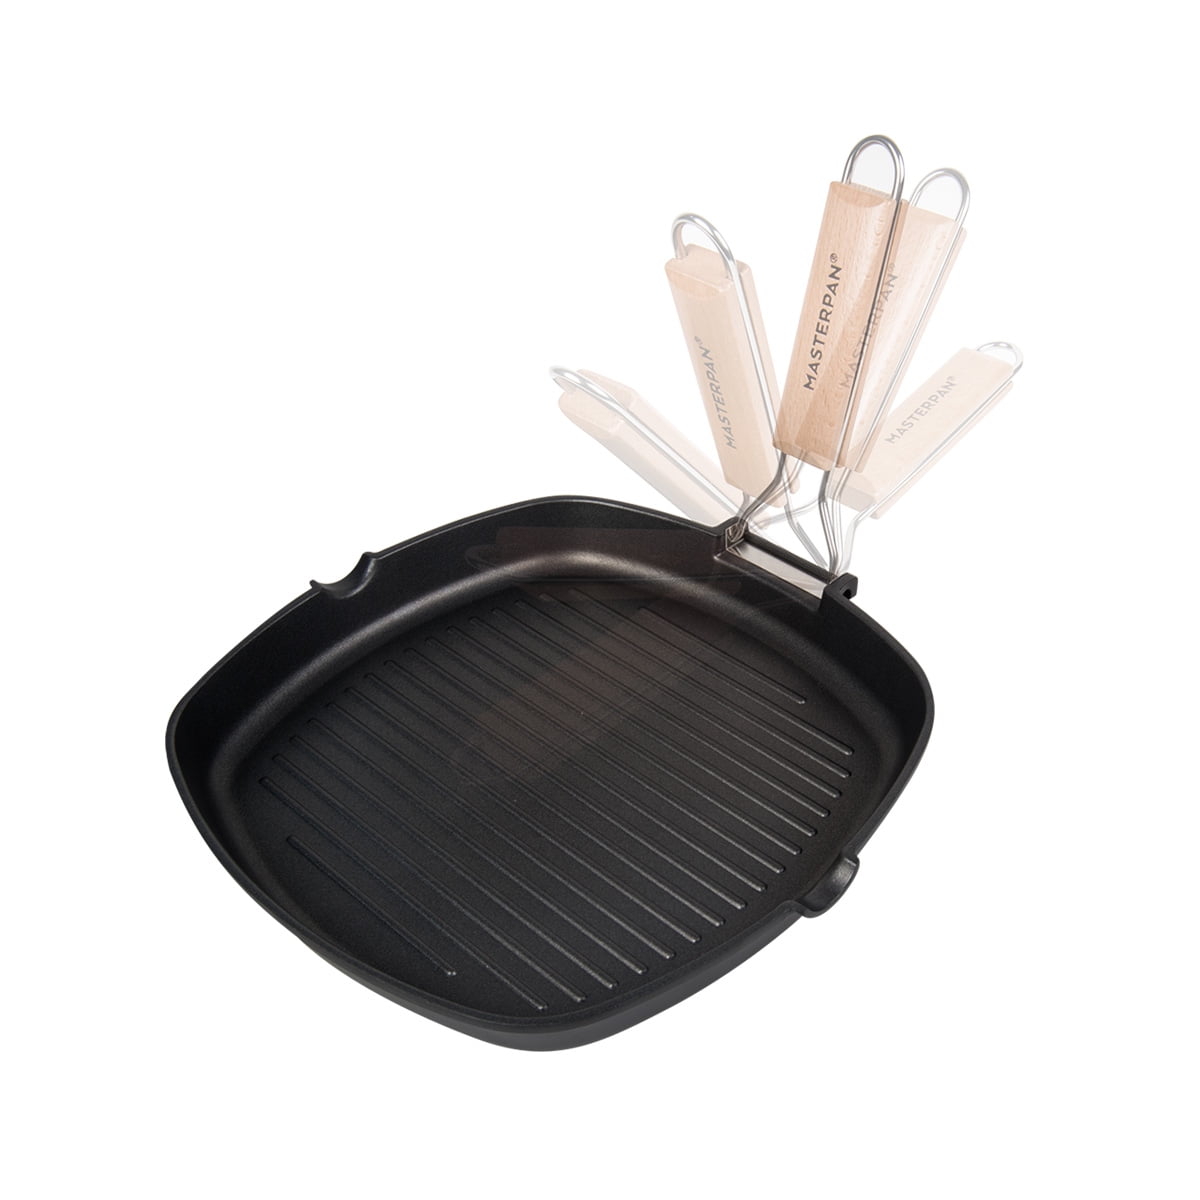 Stovetop Grill Pan, Non-stick Frying Pan With Folding Beech Wood Handle Non-stick  Grill Pan With Pour Spouts For Outdoor Home [l]